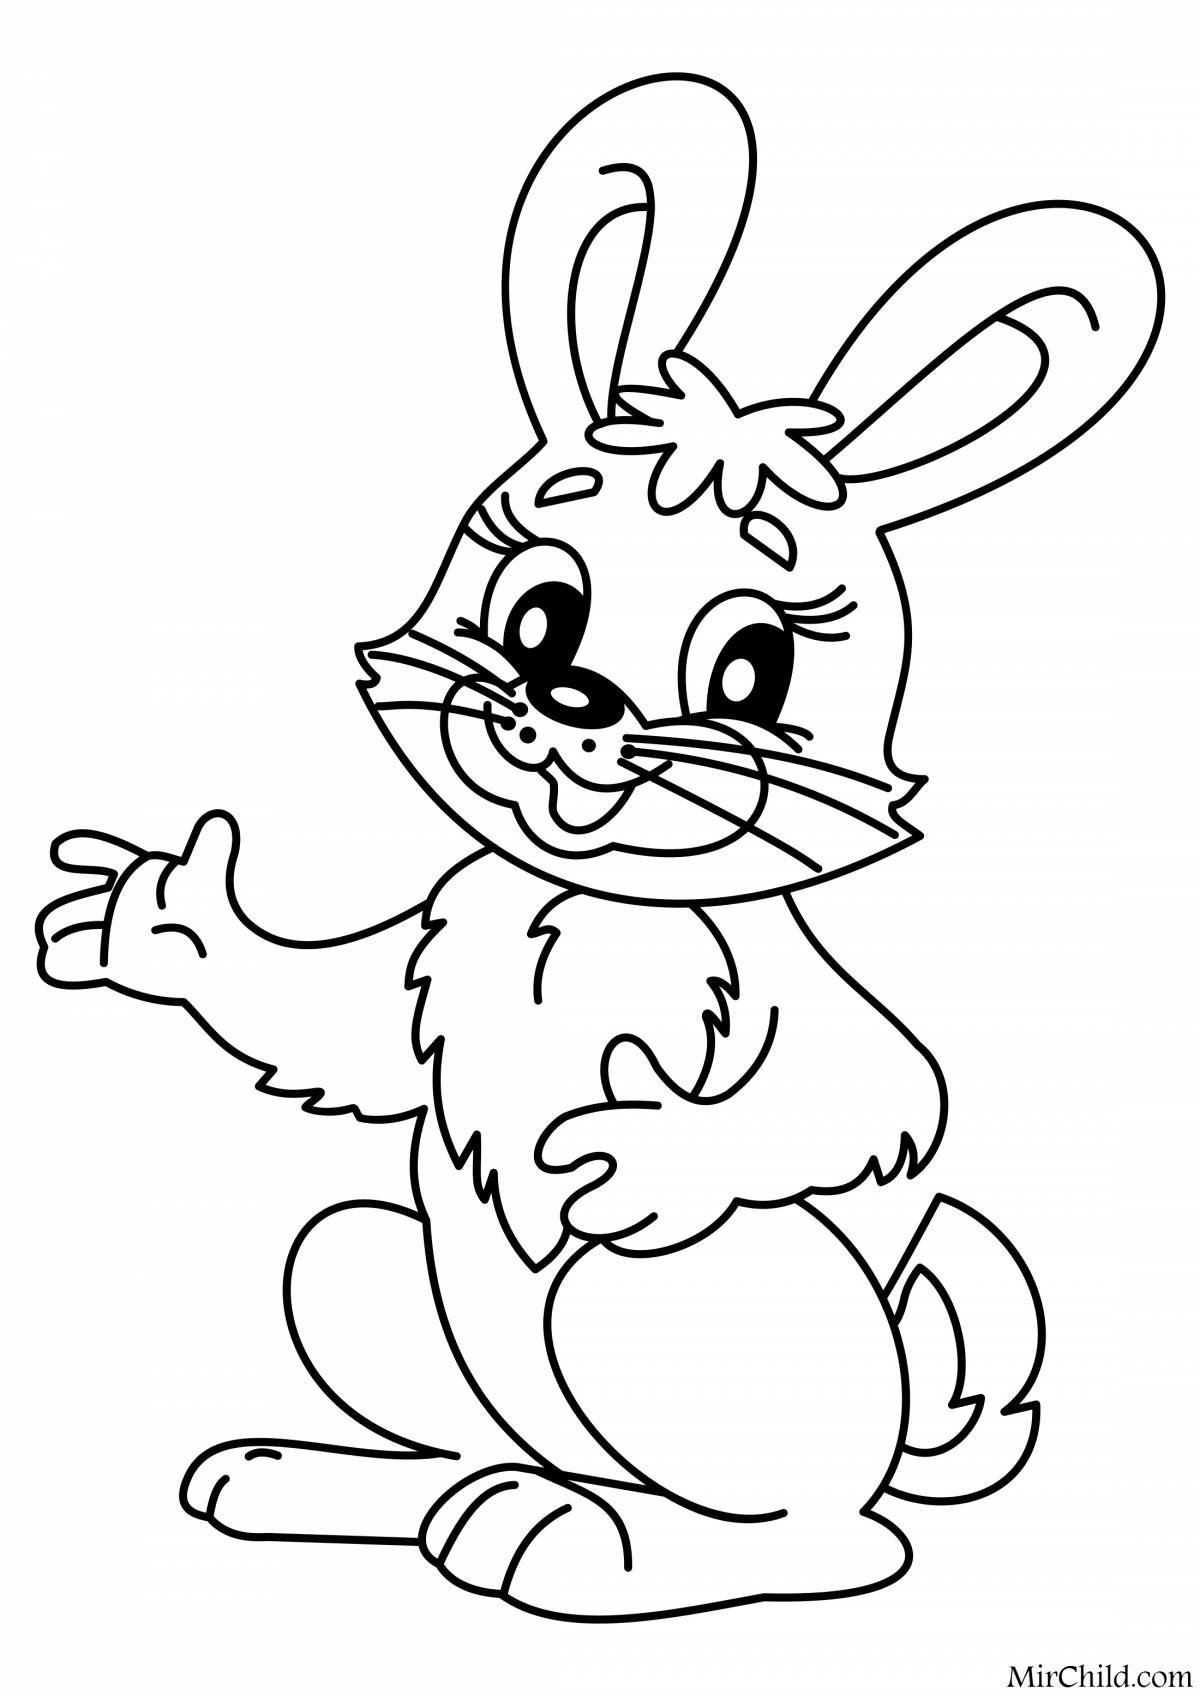 Funny bunny coloring book for kids